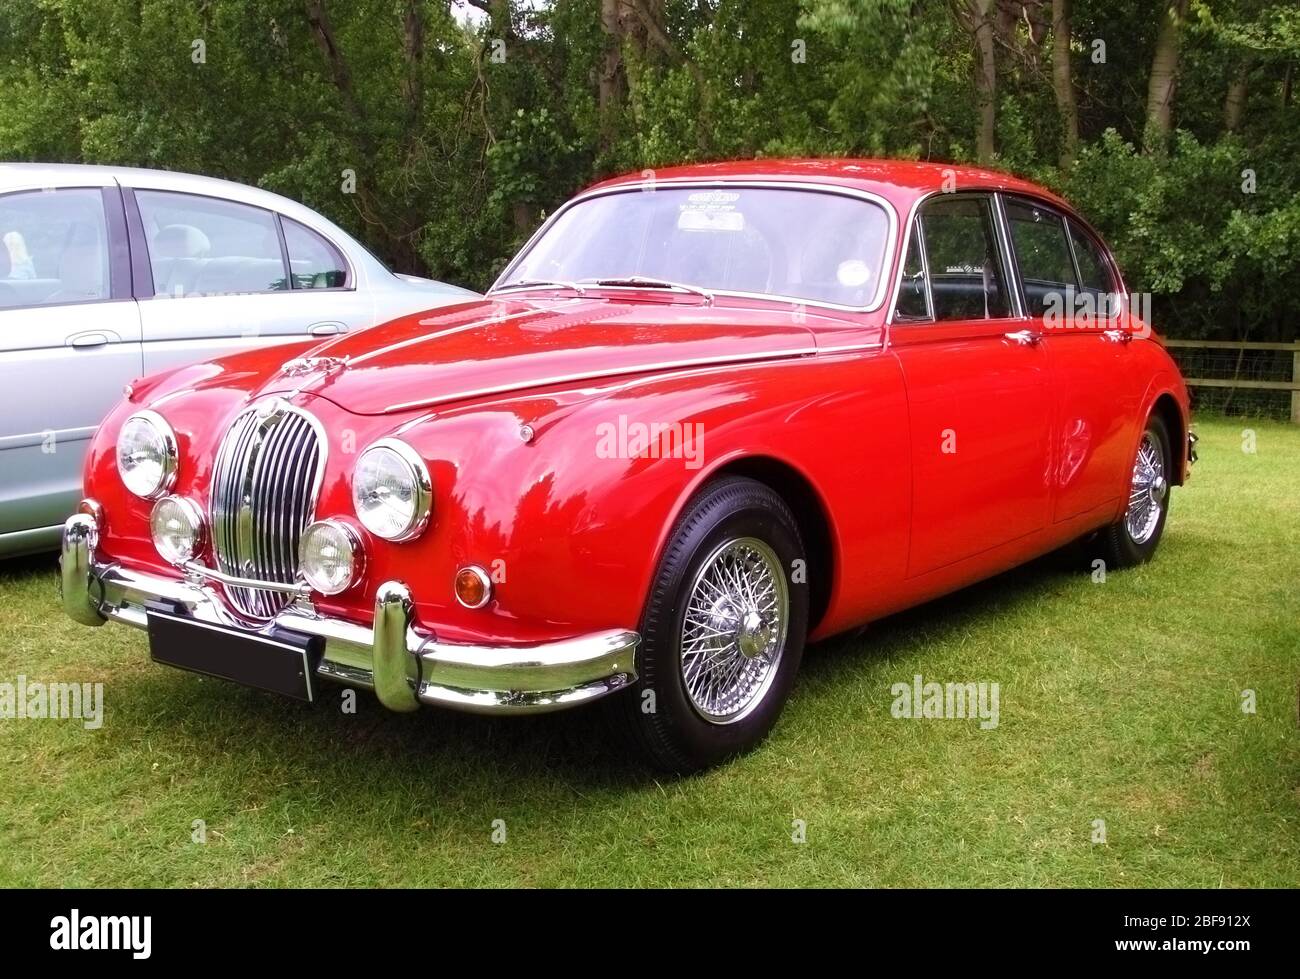 Front view of a red classic jaguar saloon car Stock Photo - Alamy